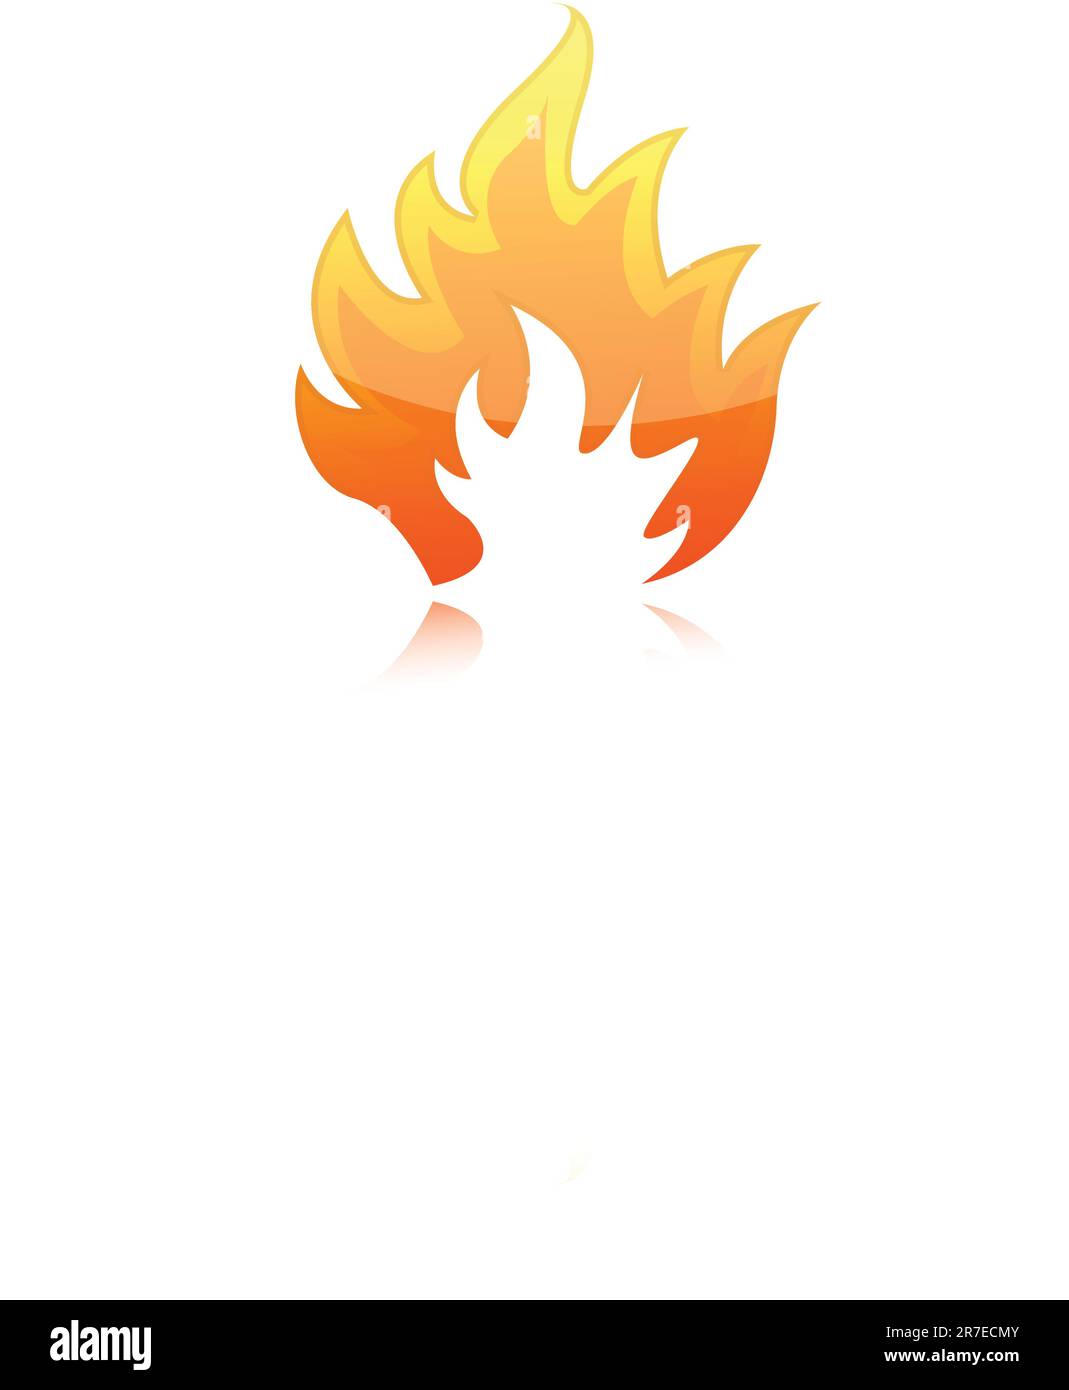 Illustration of fire flames isolated over a white background. Stock Vector